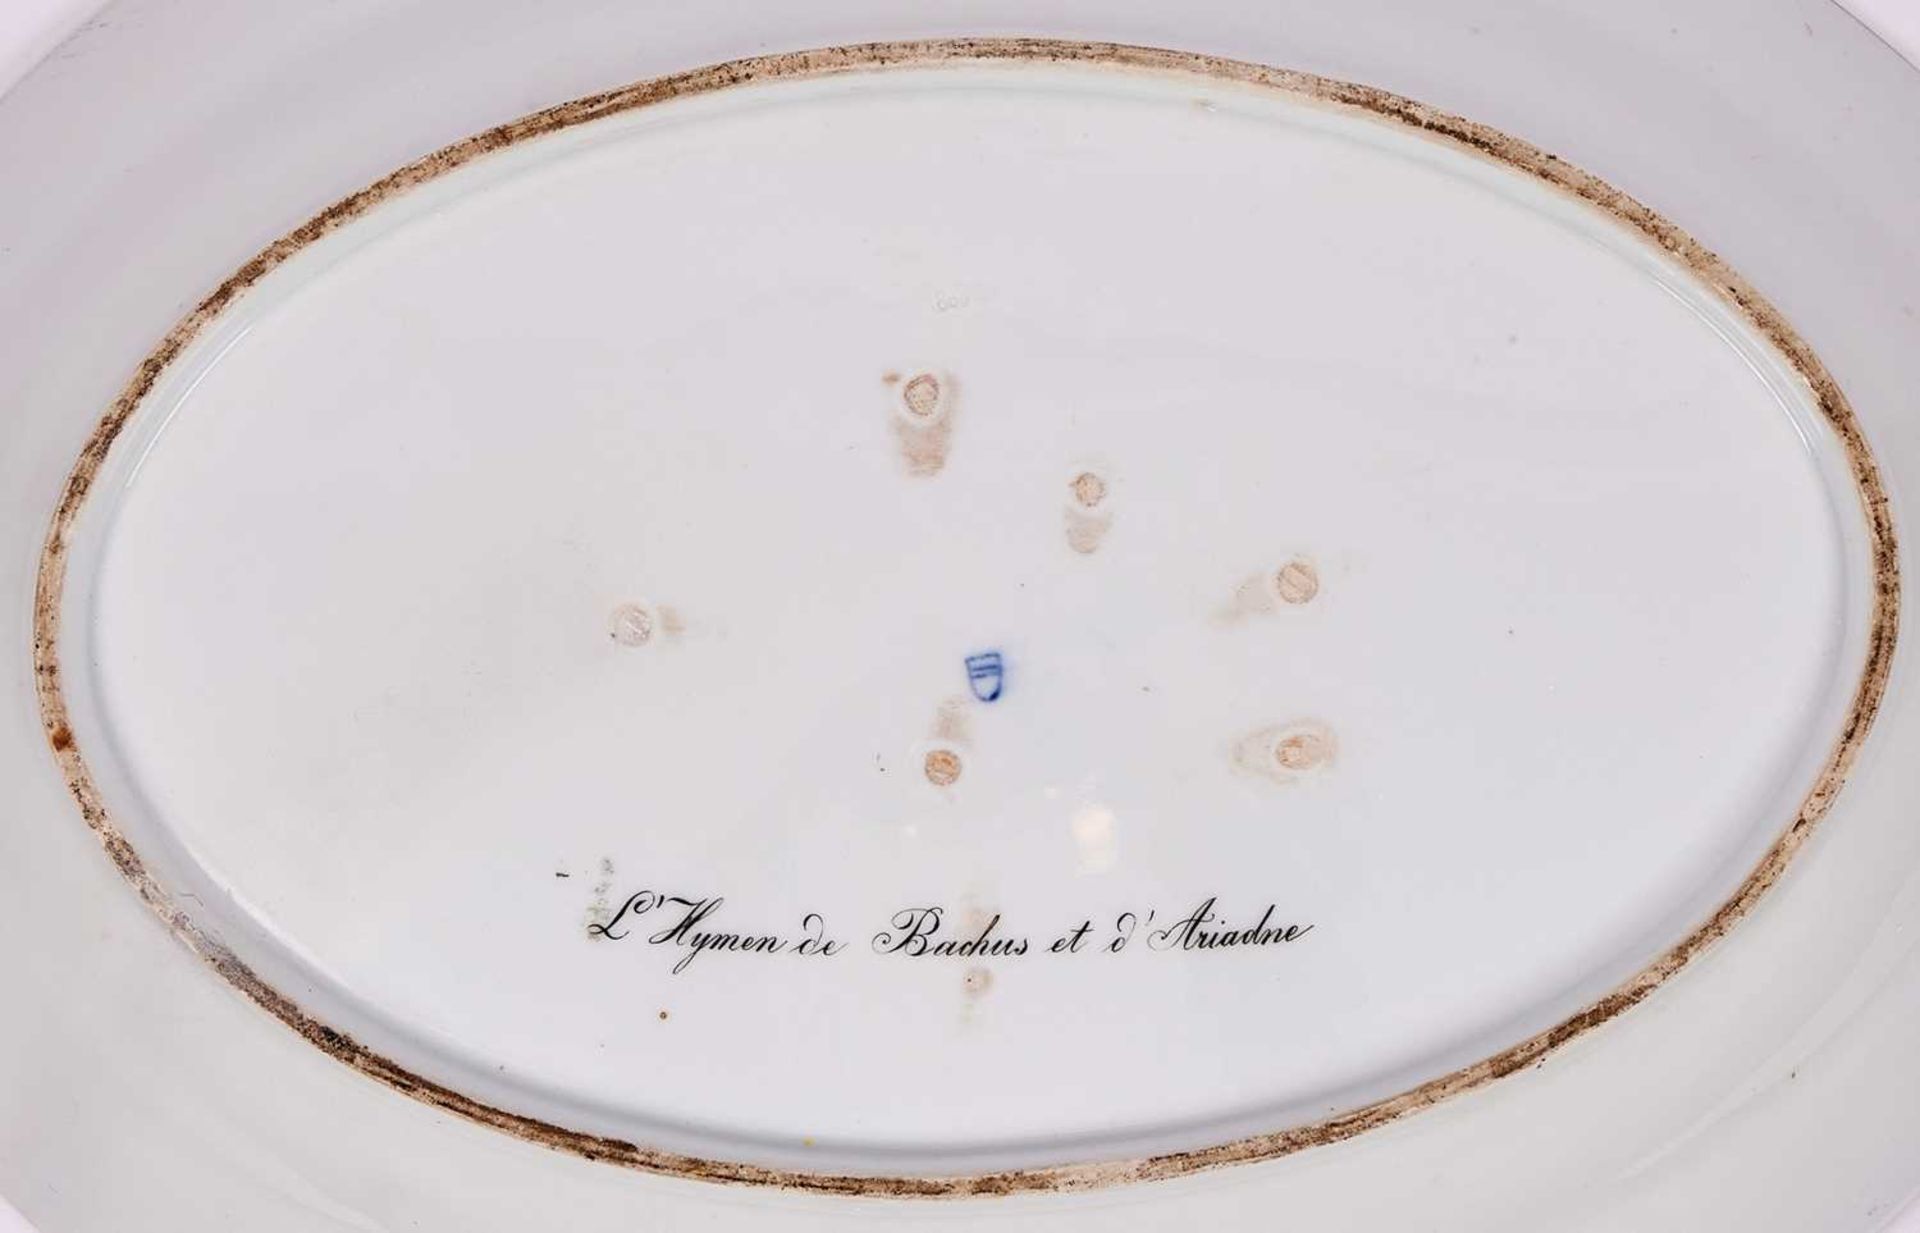 A FINE AND LARGE 19TH CENTURY VIENNA PORCELAIN DISH DEPICTING BACCHUS AND ARIADNE - Image 5 of 5